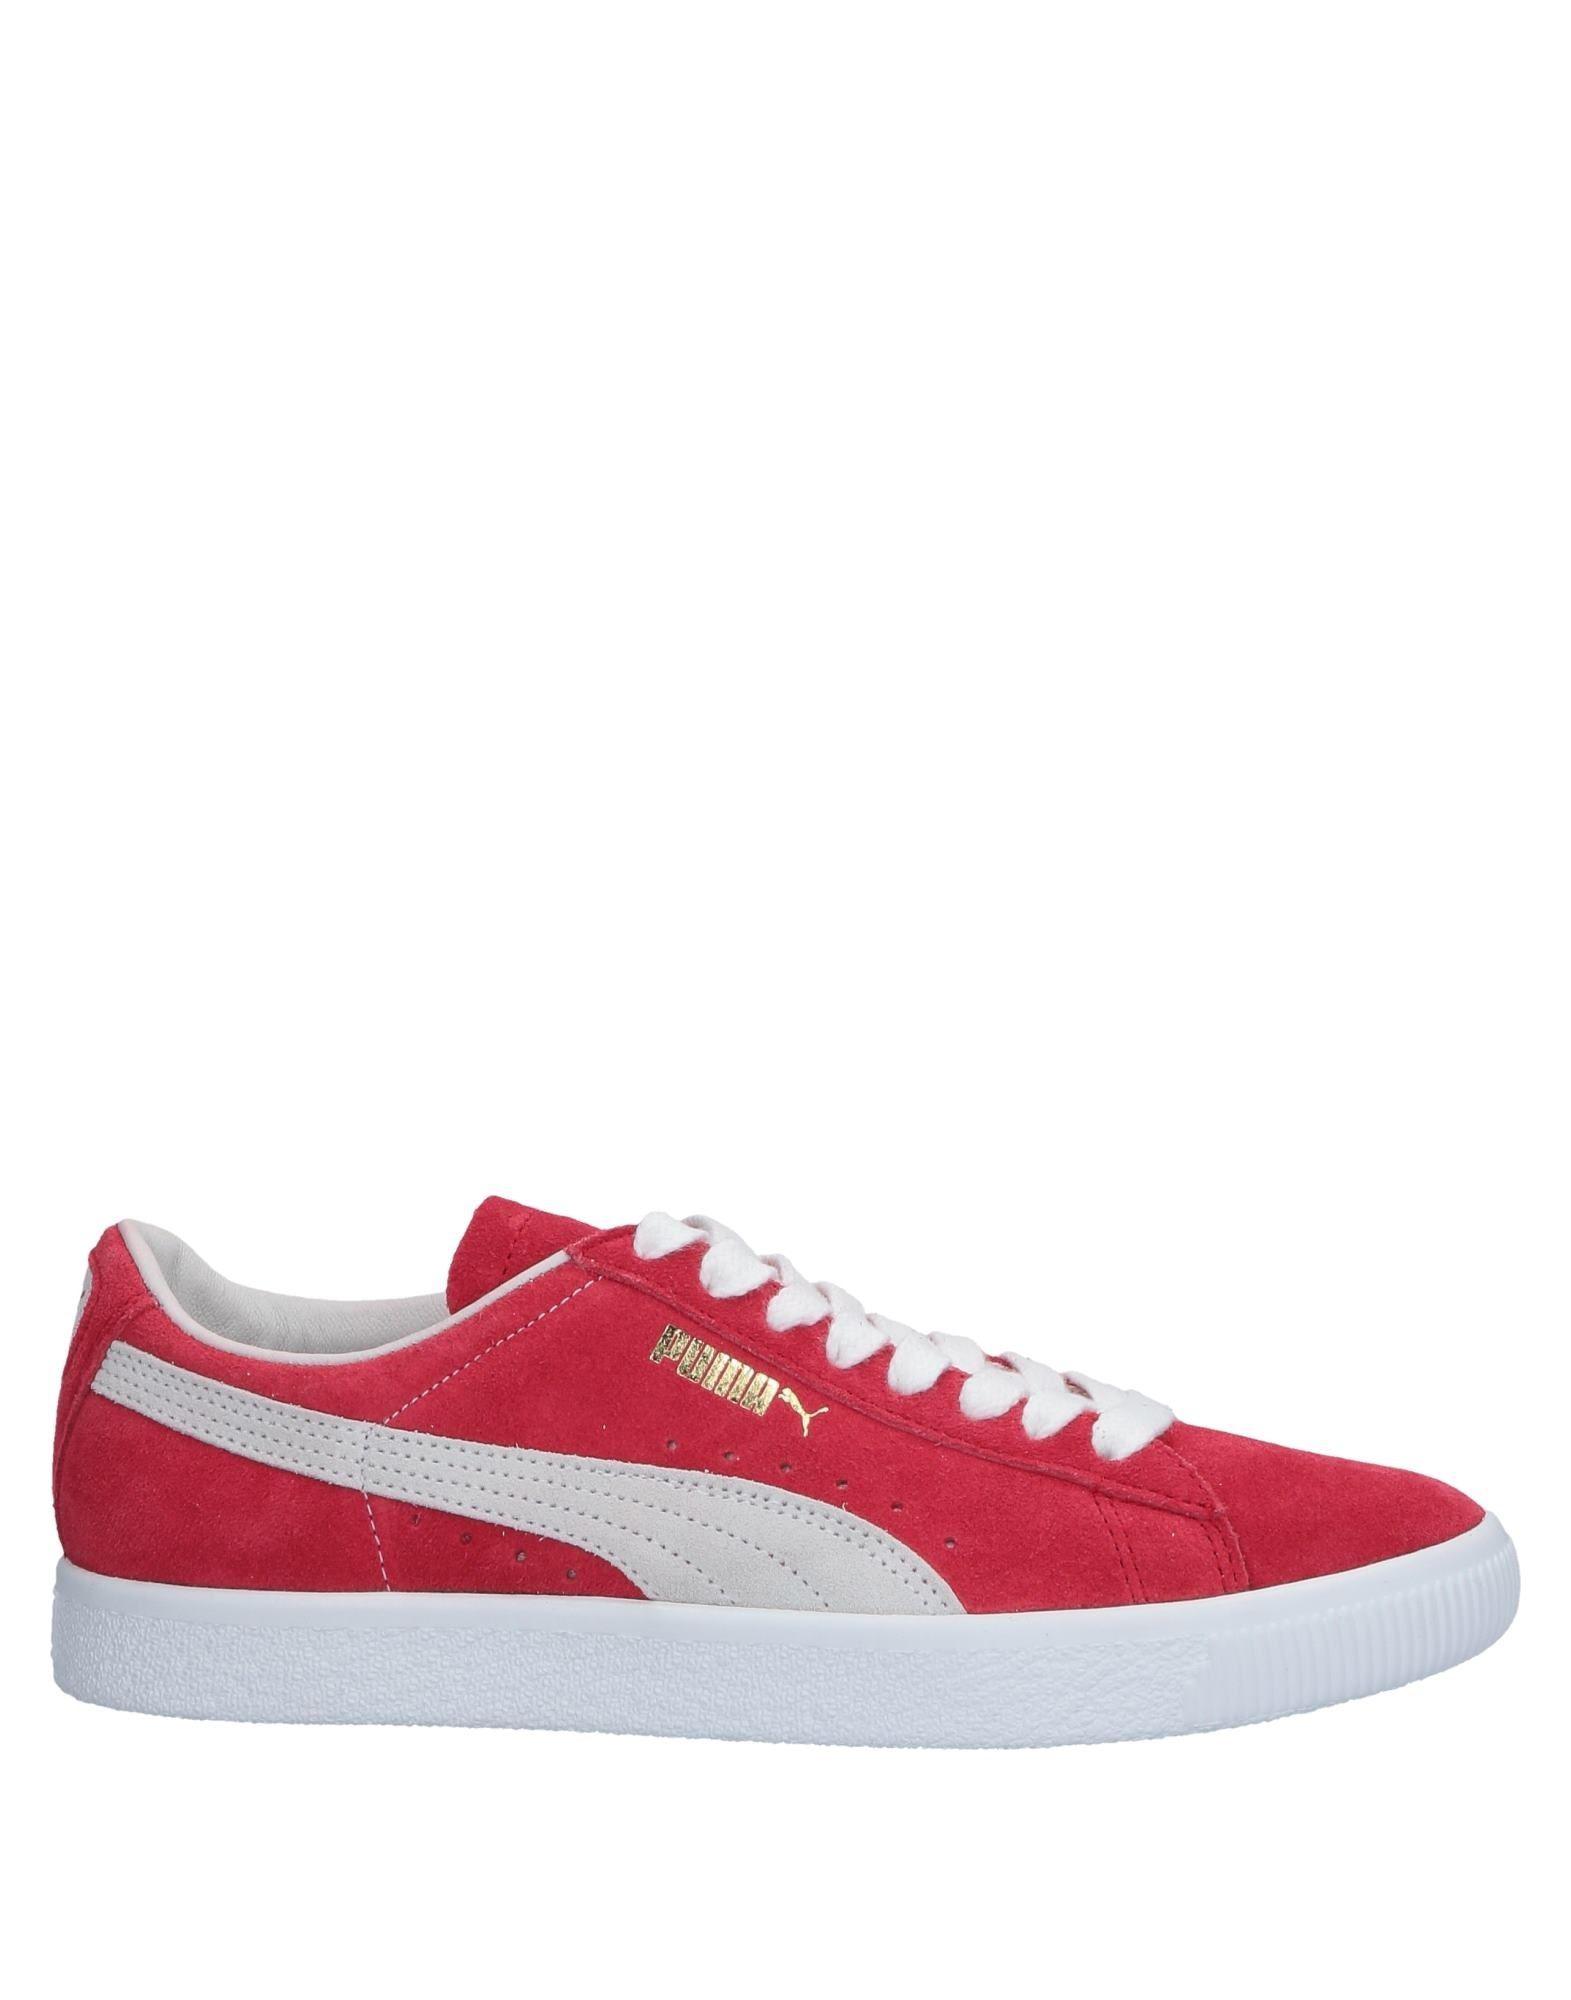 PUMA Suede Low-tops & Sneakers in Red for Men - Save 18% - Lyst